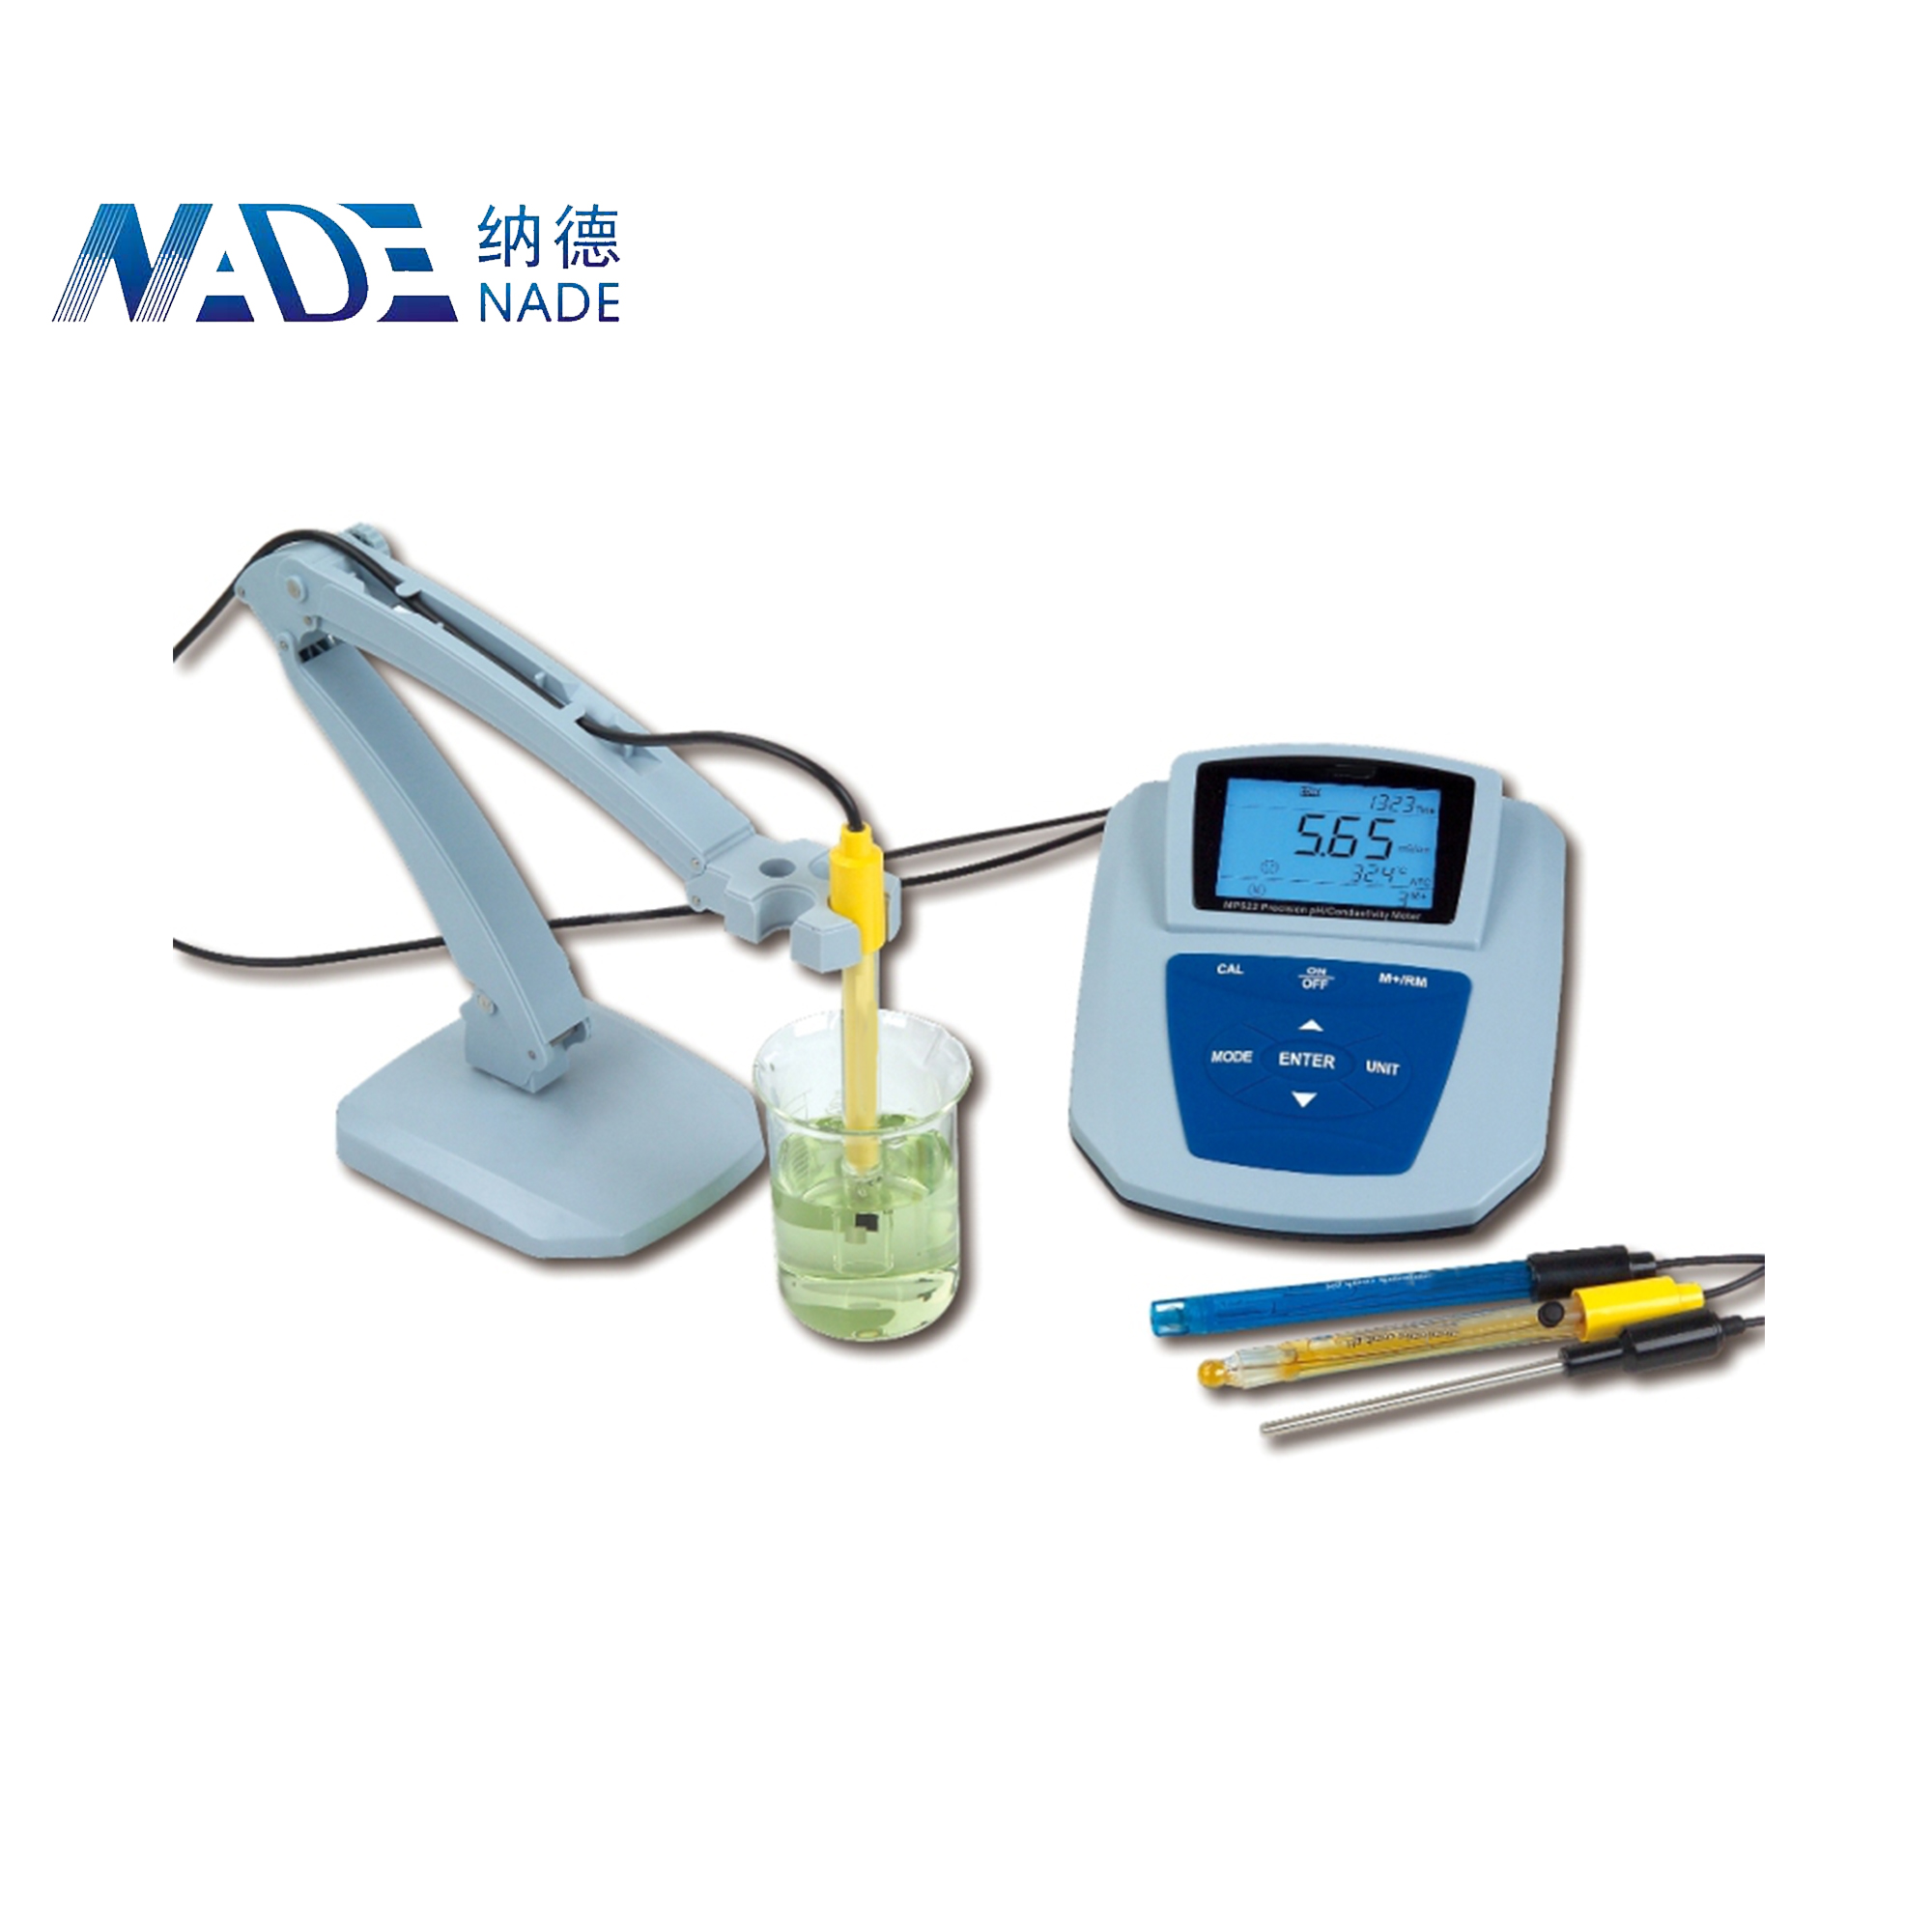 NADE lab Bench Type High precision Multi-Parameter pH/Conductivity Meter MP522